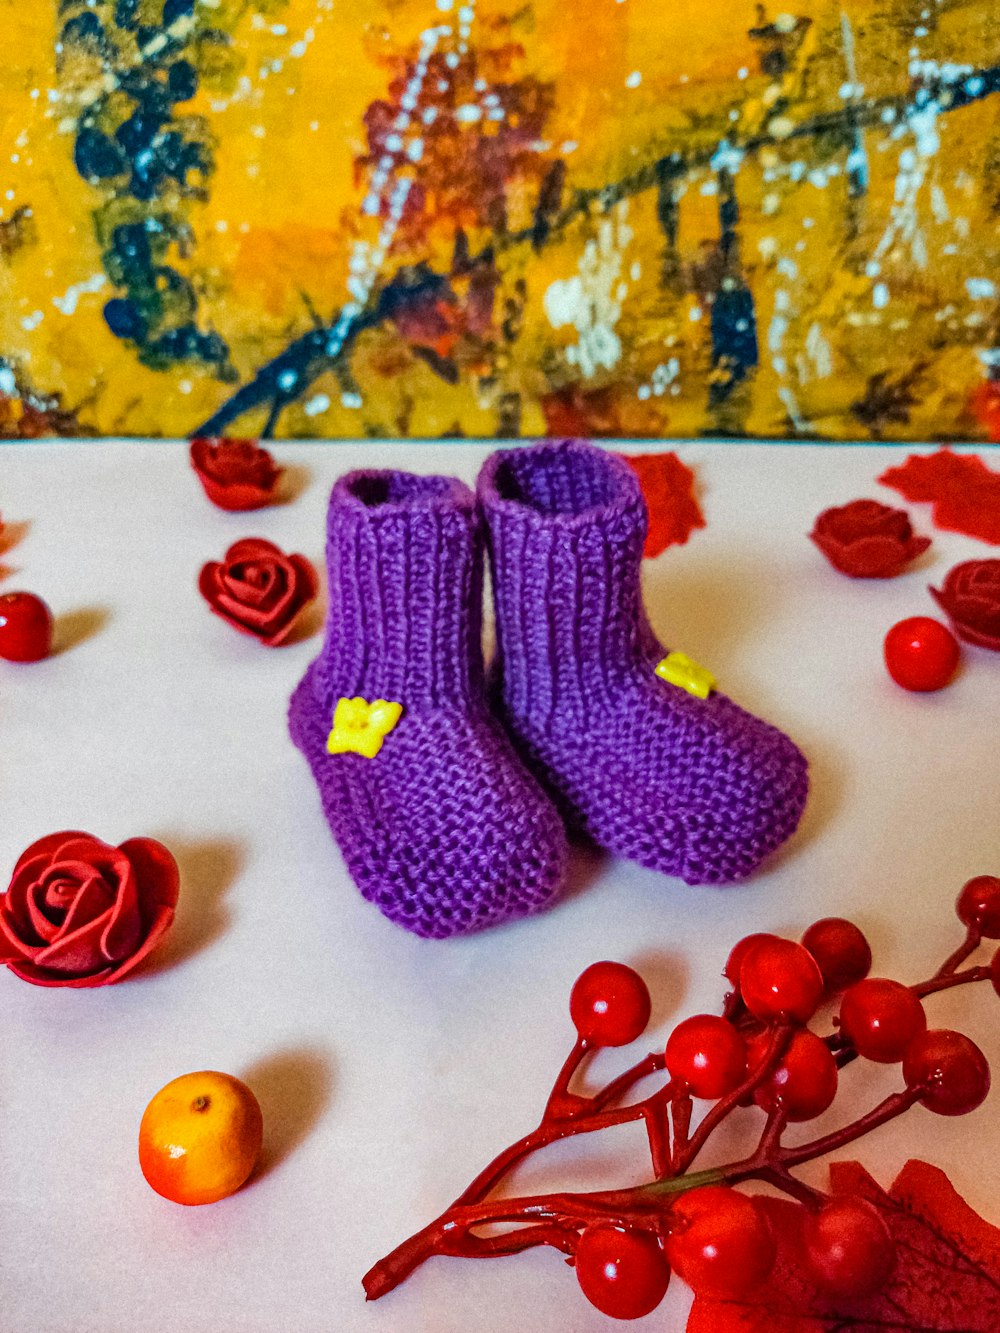 a close up of a pair of purple knitted shoes